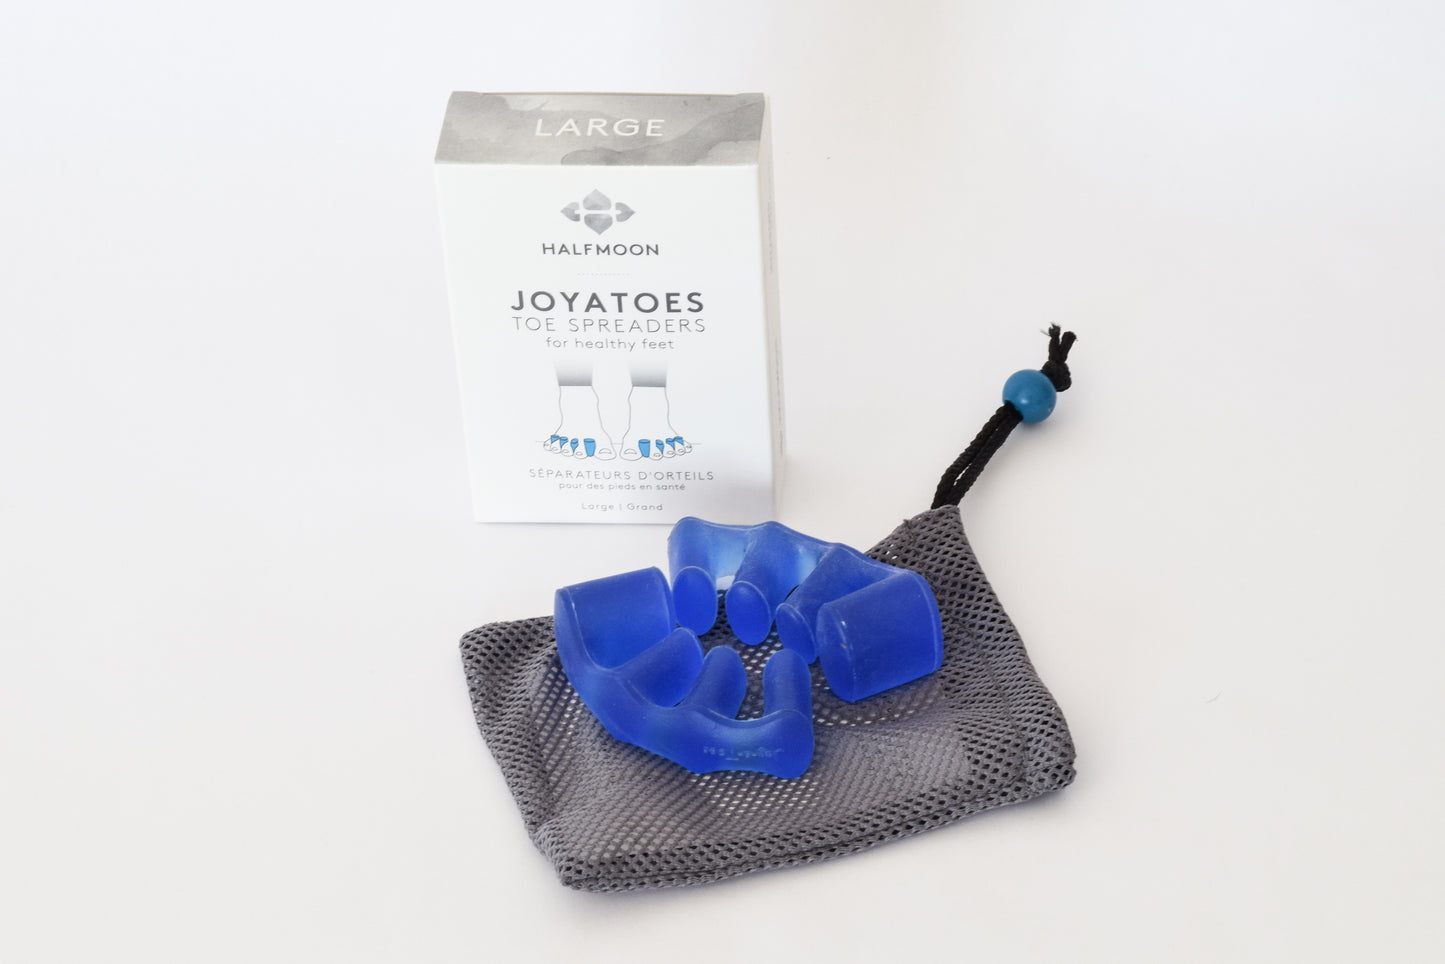 
                  
                    Joy-a-toes toe spacers - shown as blue silicone gel spacers on a mesh carrying bag with the clean white Joy-a-toe box on the background.
                  
                